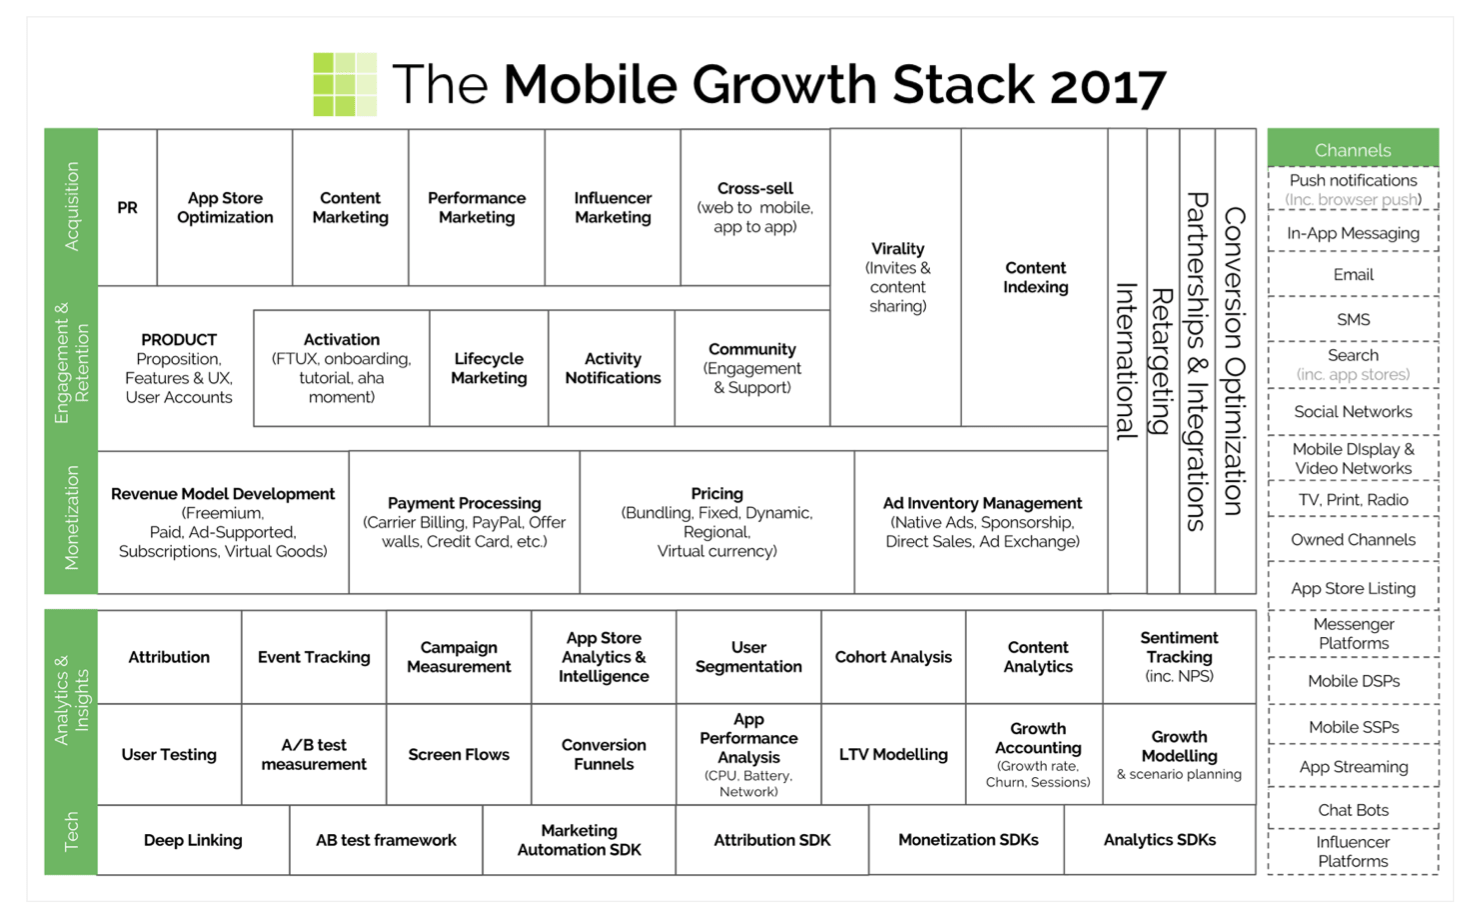 The Mobile Growth Stack